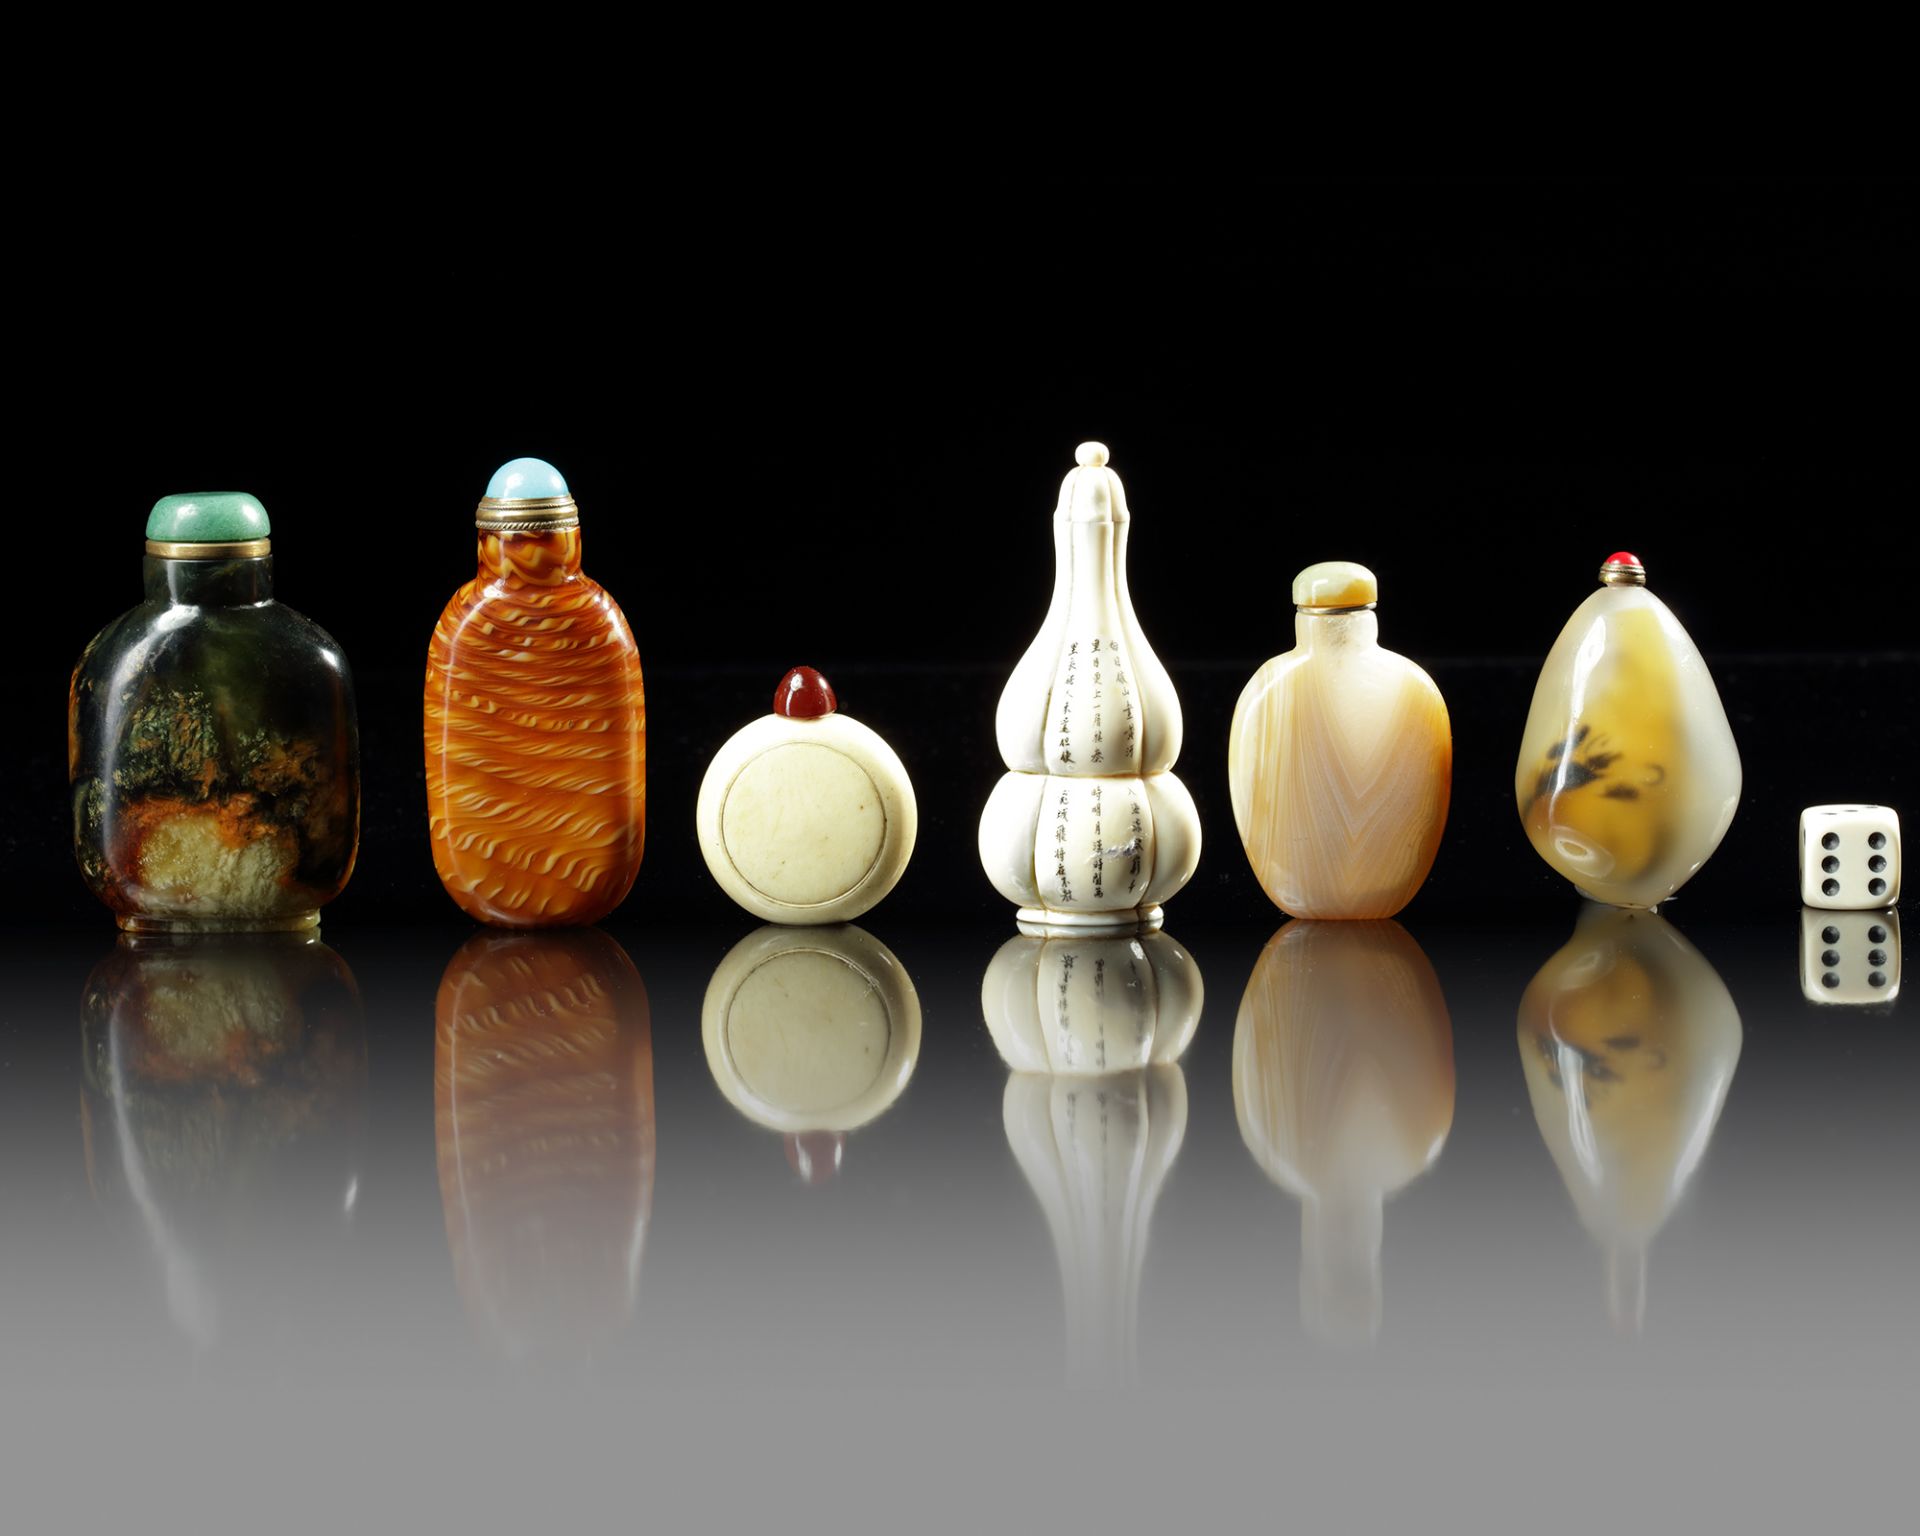 SIX CHINESE SNUFF BOTTLES, 19TH-20TH CENTURY - Image 3 of 3